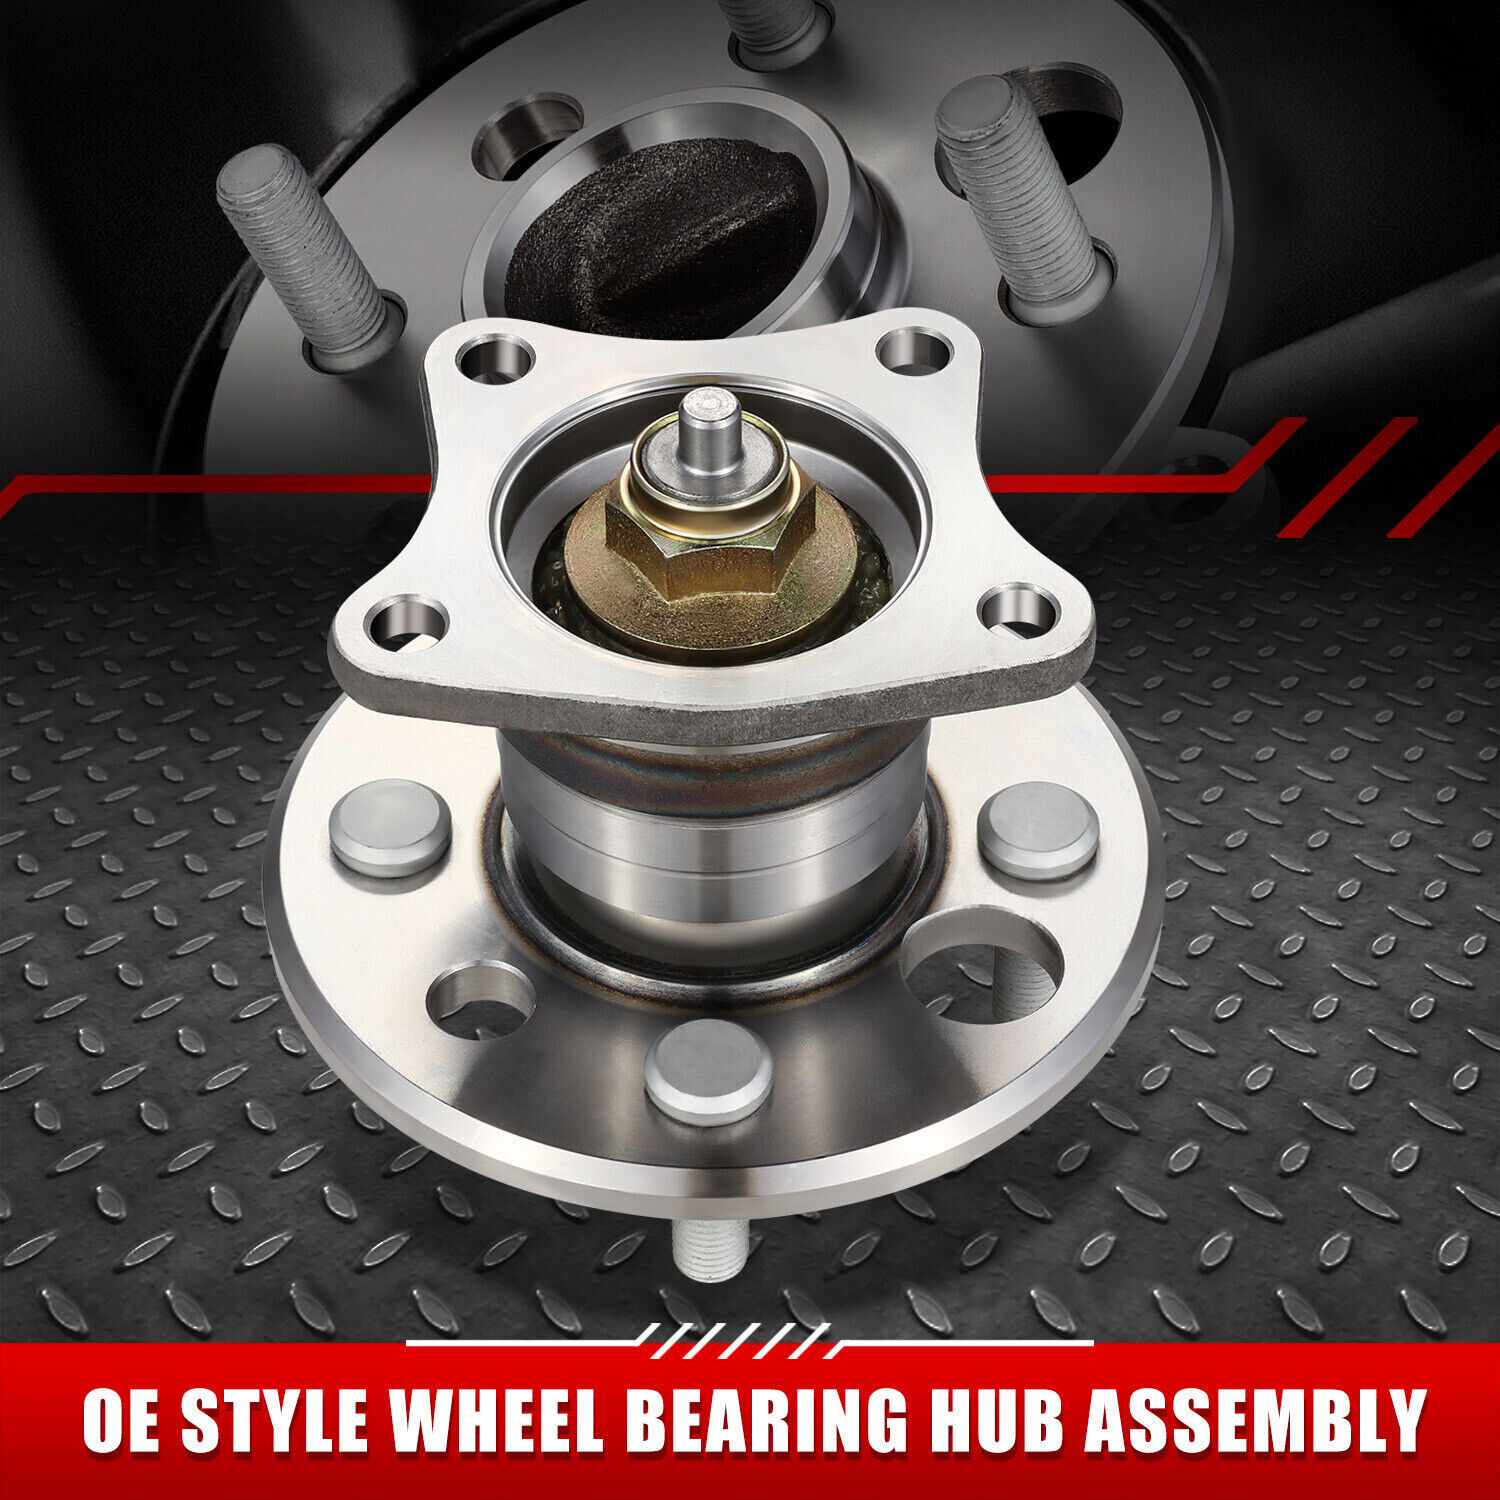 FOR 93-02 CHEVY/GMC PRIZM COROLLA OE STYLE REAR WHEEL BEARING & HUB ASSEMBLY